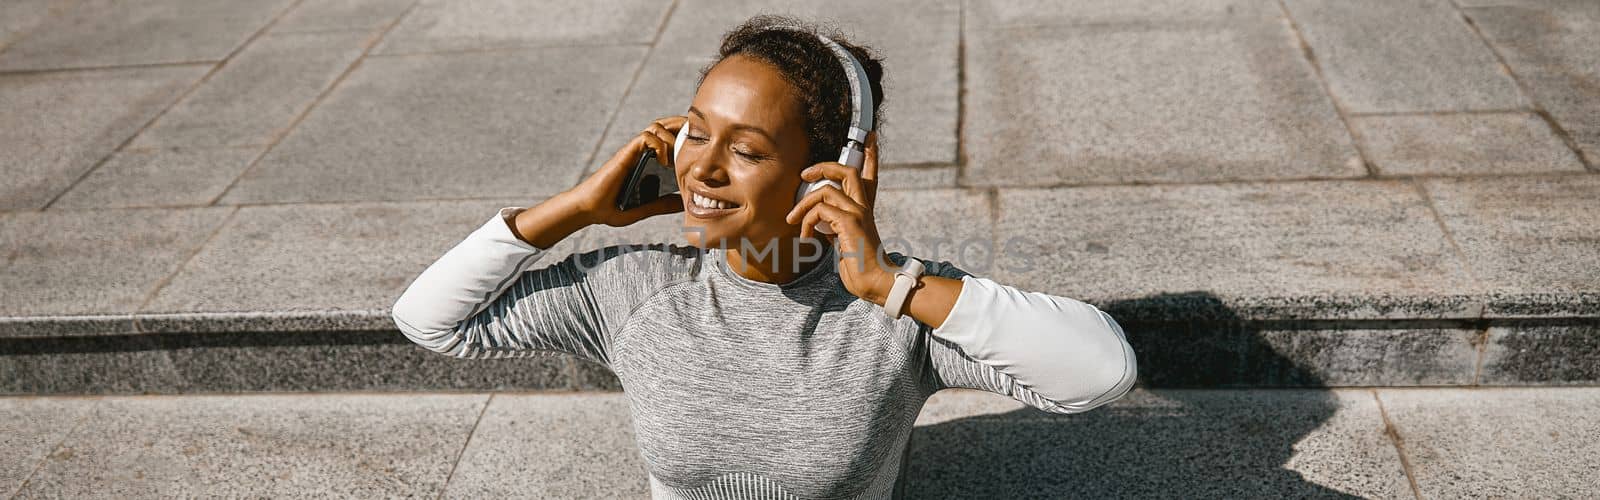 Sporty woman in headphones listening to music after training outdoors. Active lifestyle